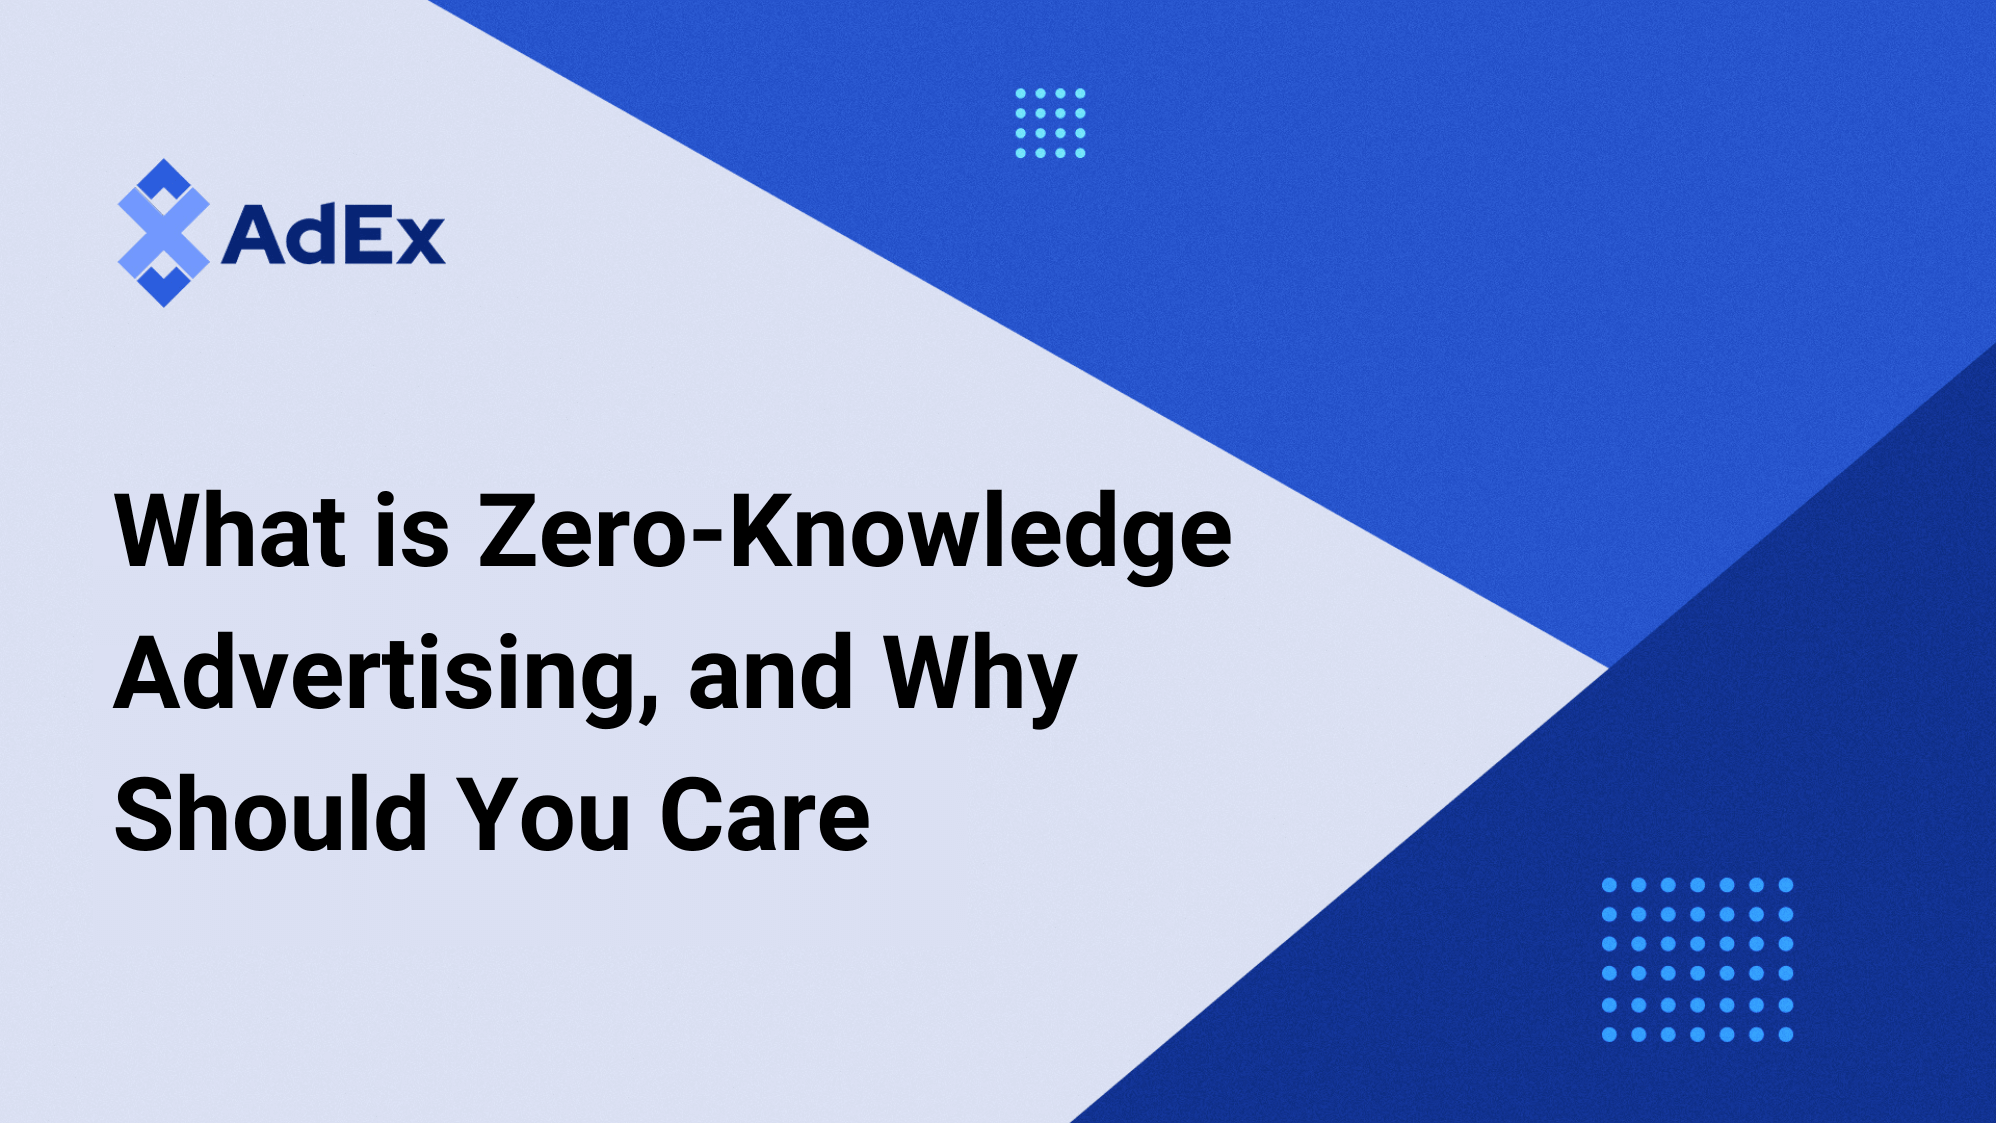 What is Zero-Knowledge Advertising, and Why Should You Care